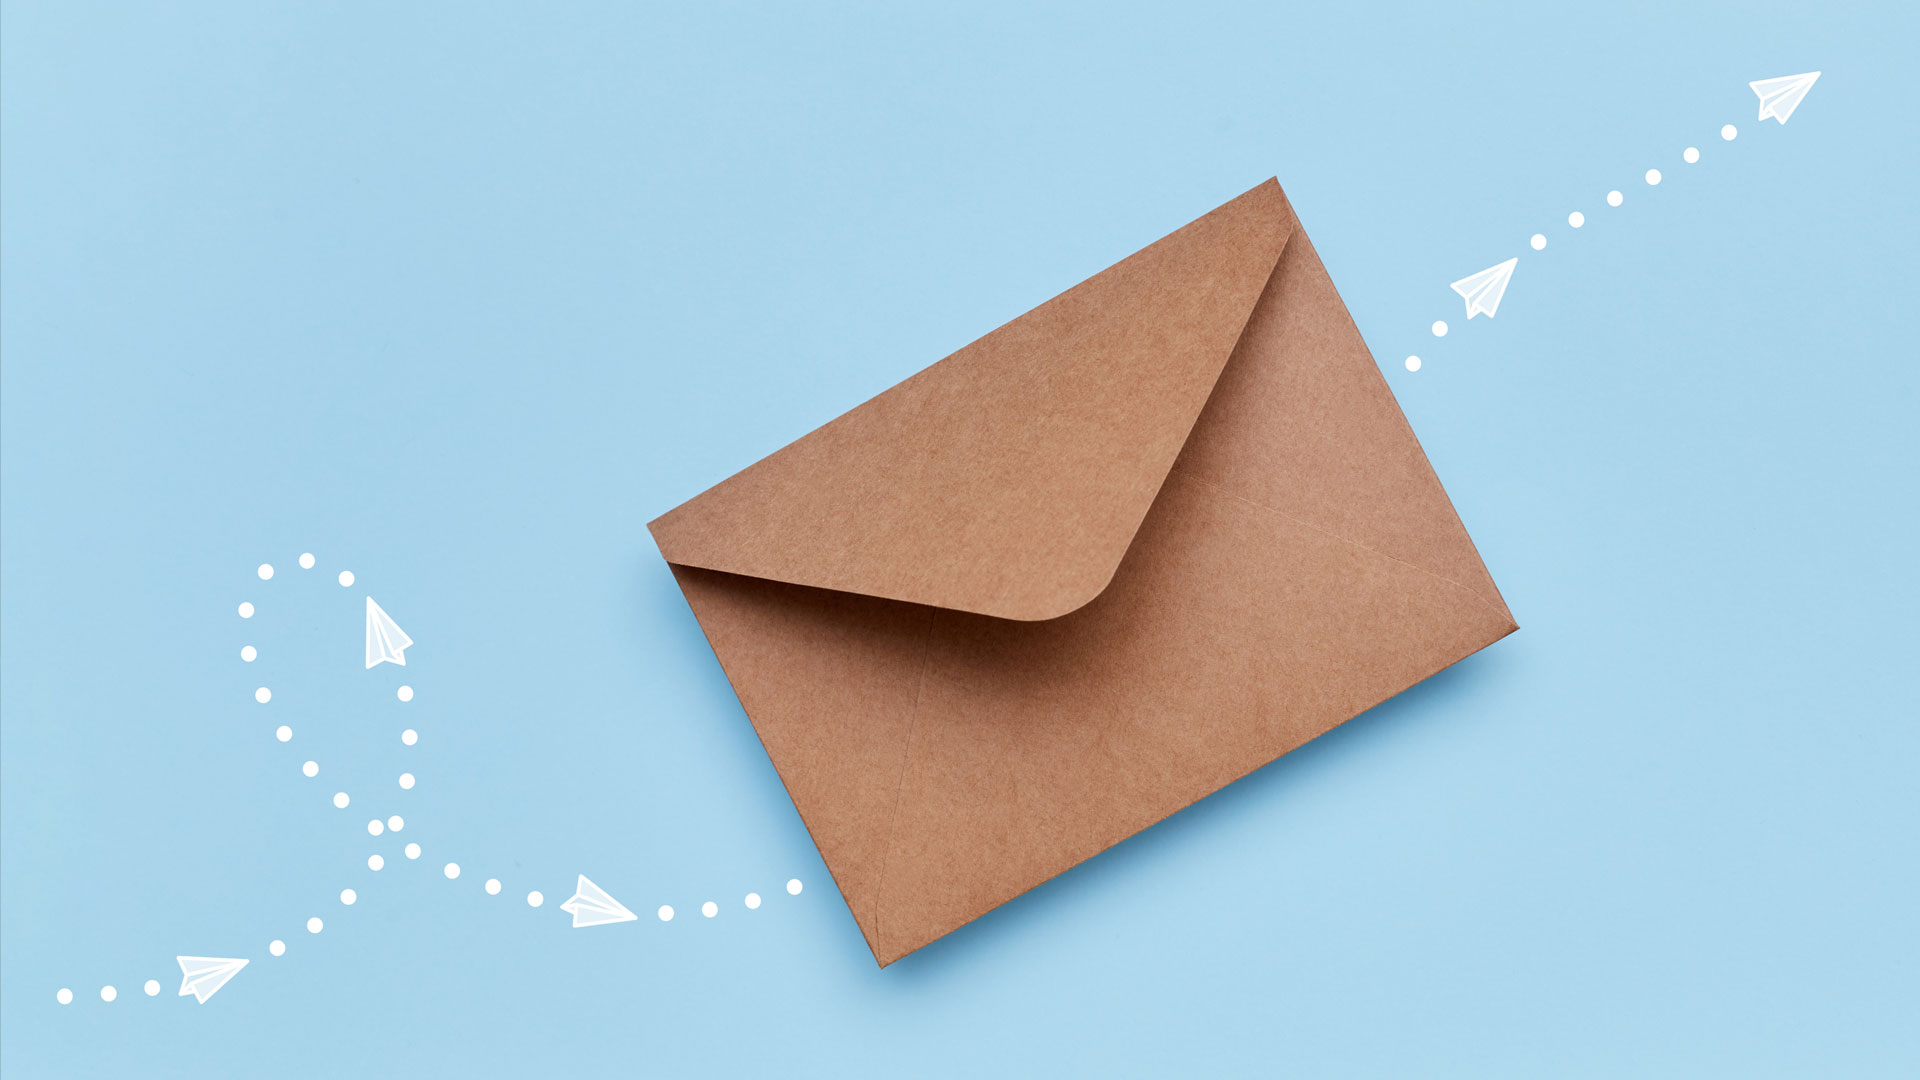 Reach customers effectively with our direct mail services.